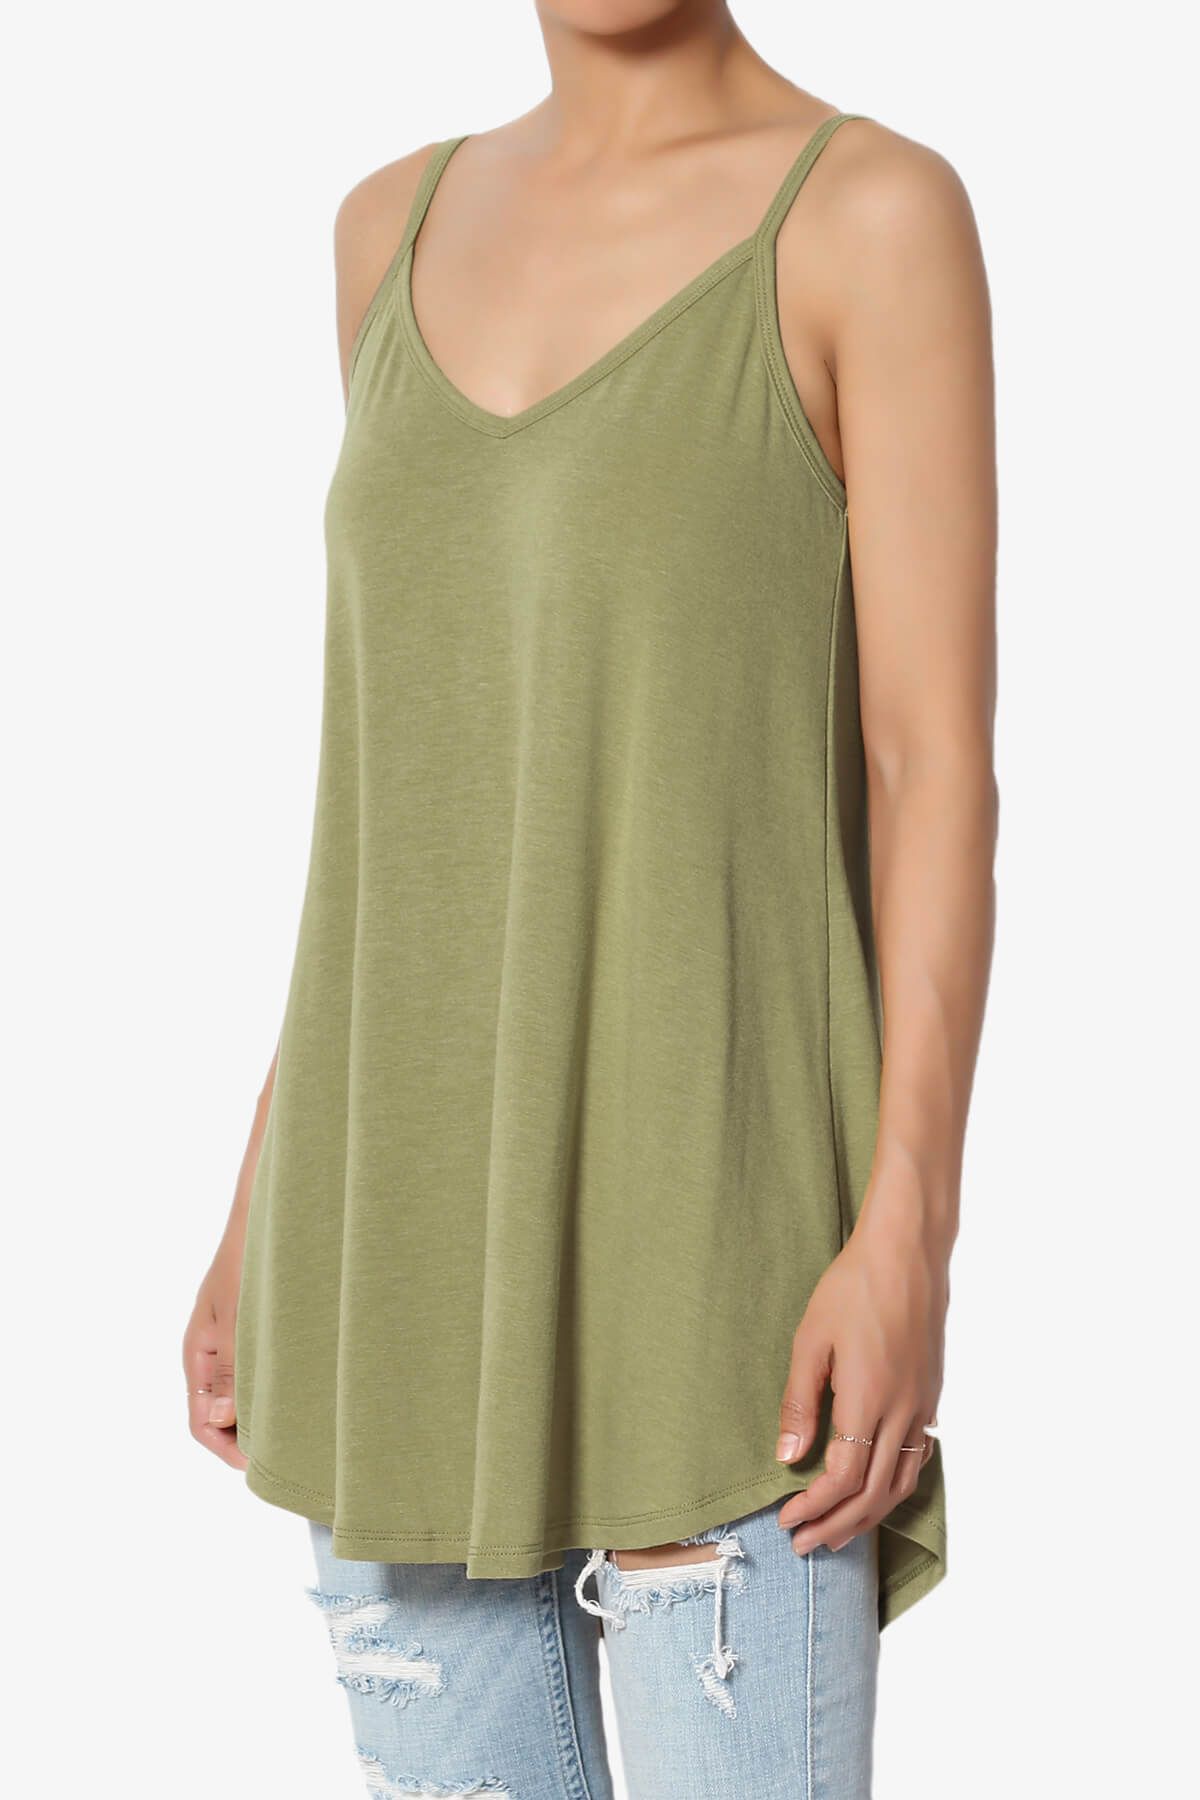 Chelsea Scoop & V Neck Flared Camisole Top KHAKI GREEN_3